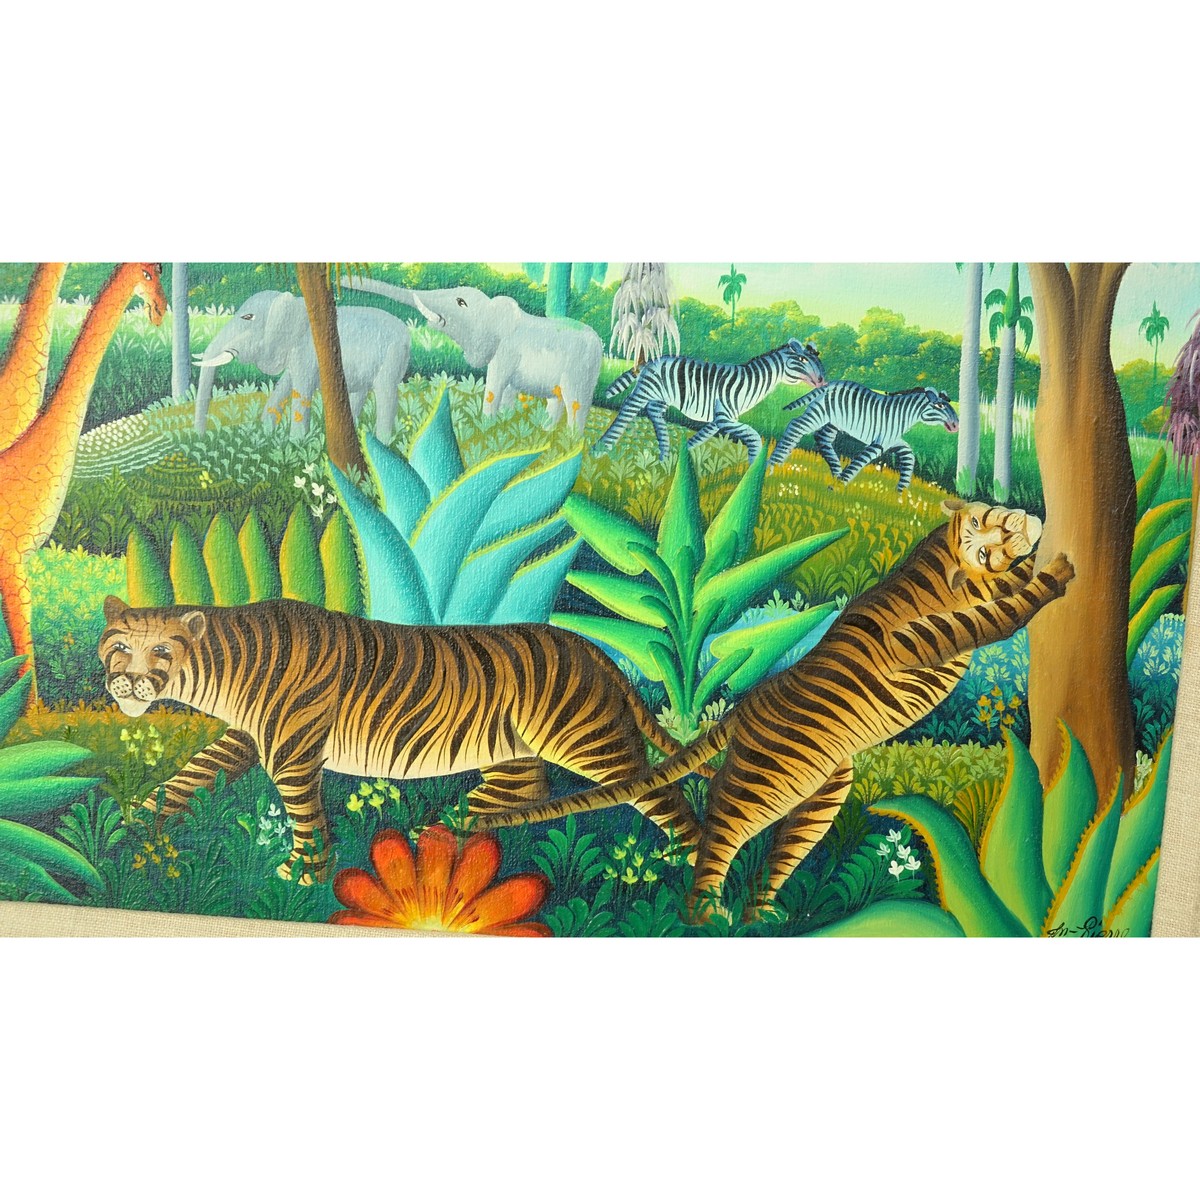 Yves Jean-Pierre, Haitian (20th C) Oil on canvas "Jungle Animals" Signed lower right. Good condition.